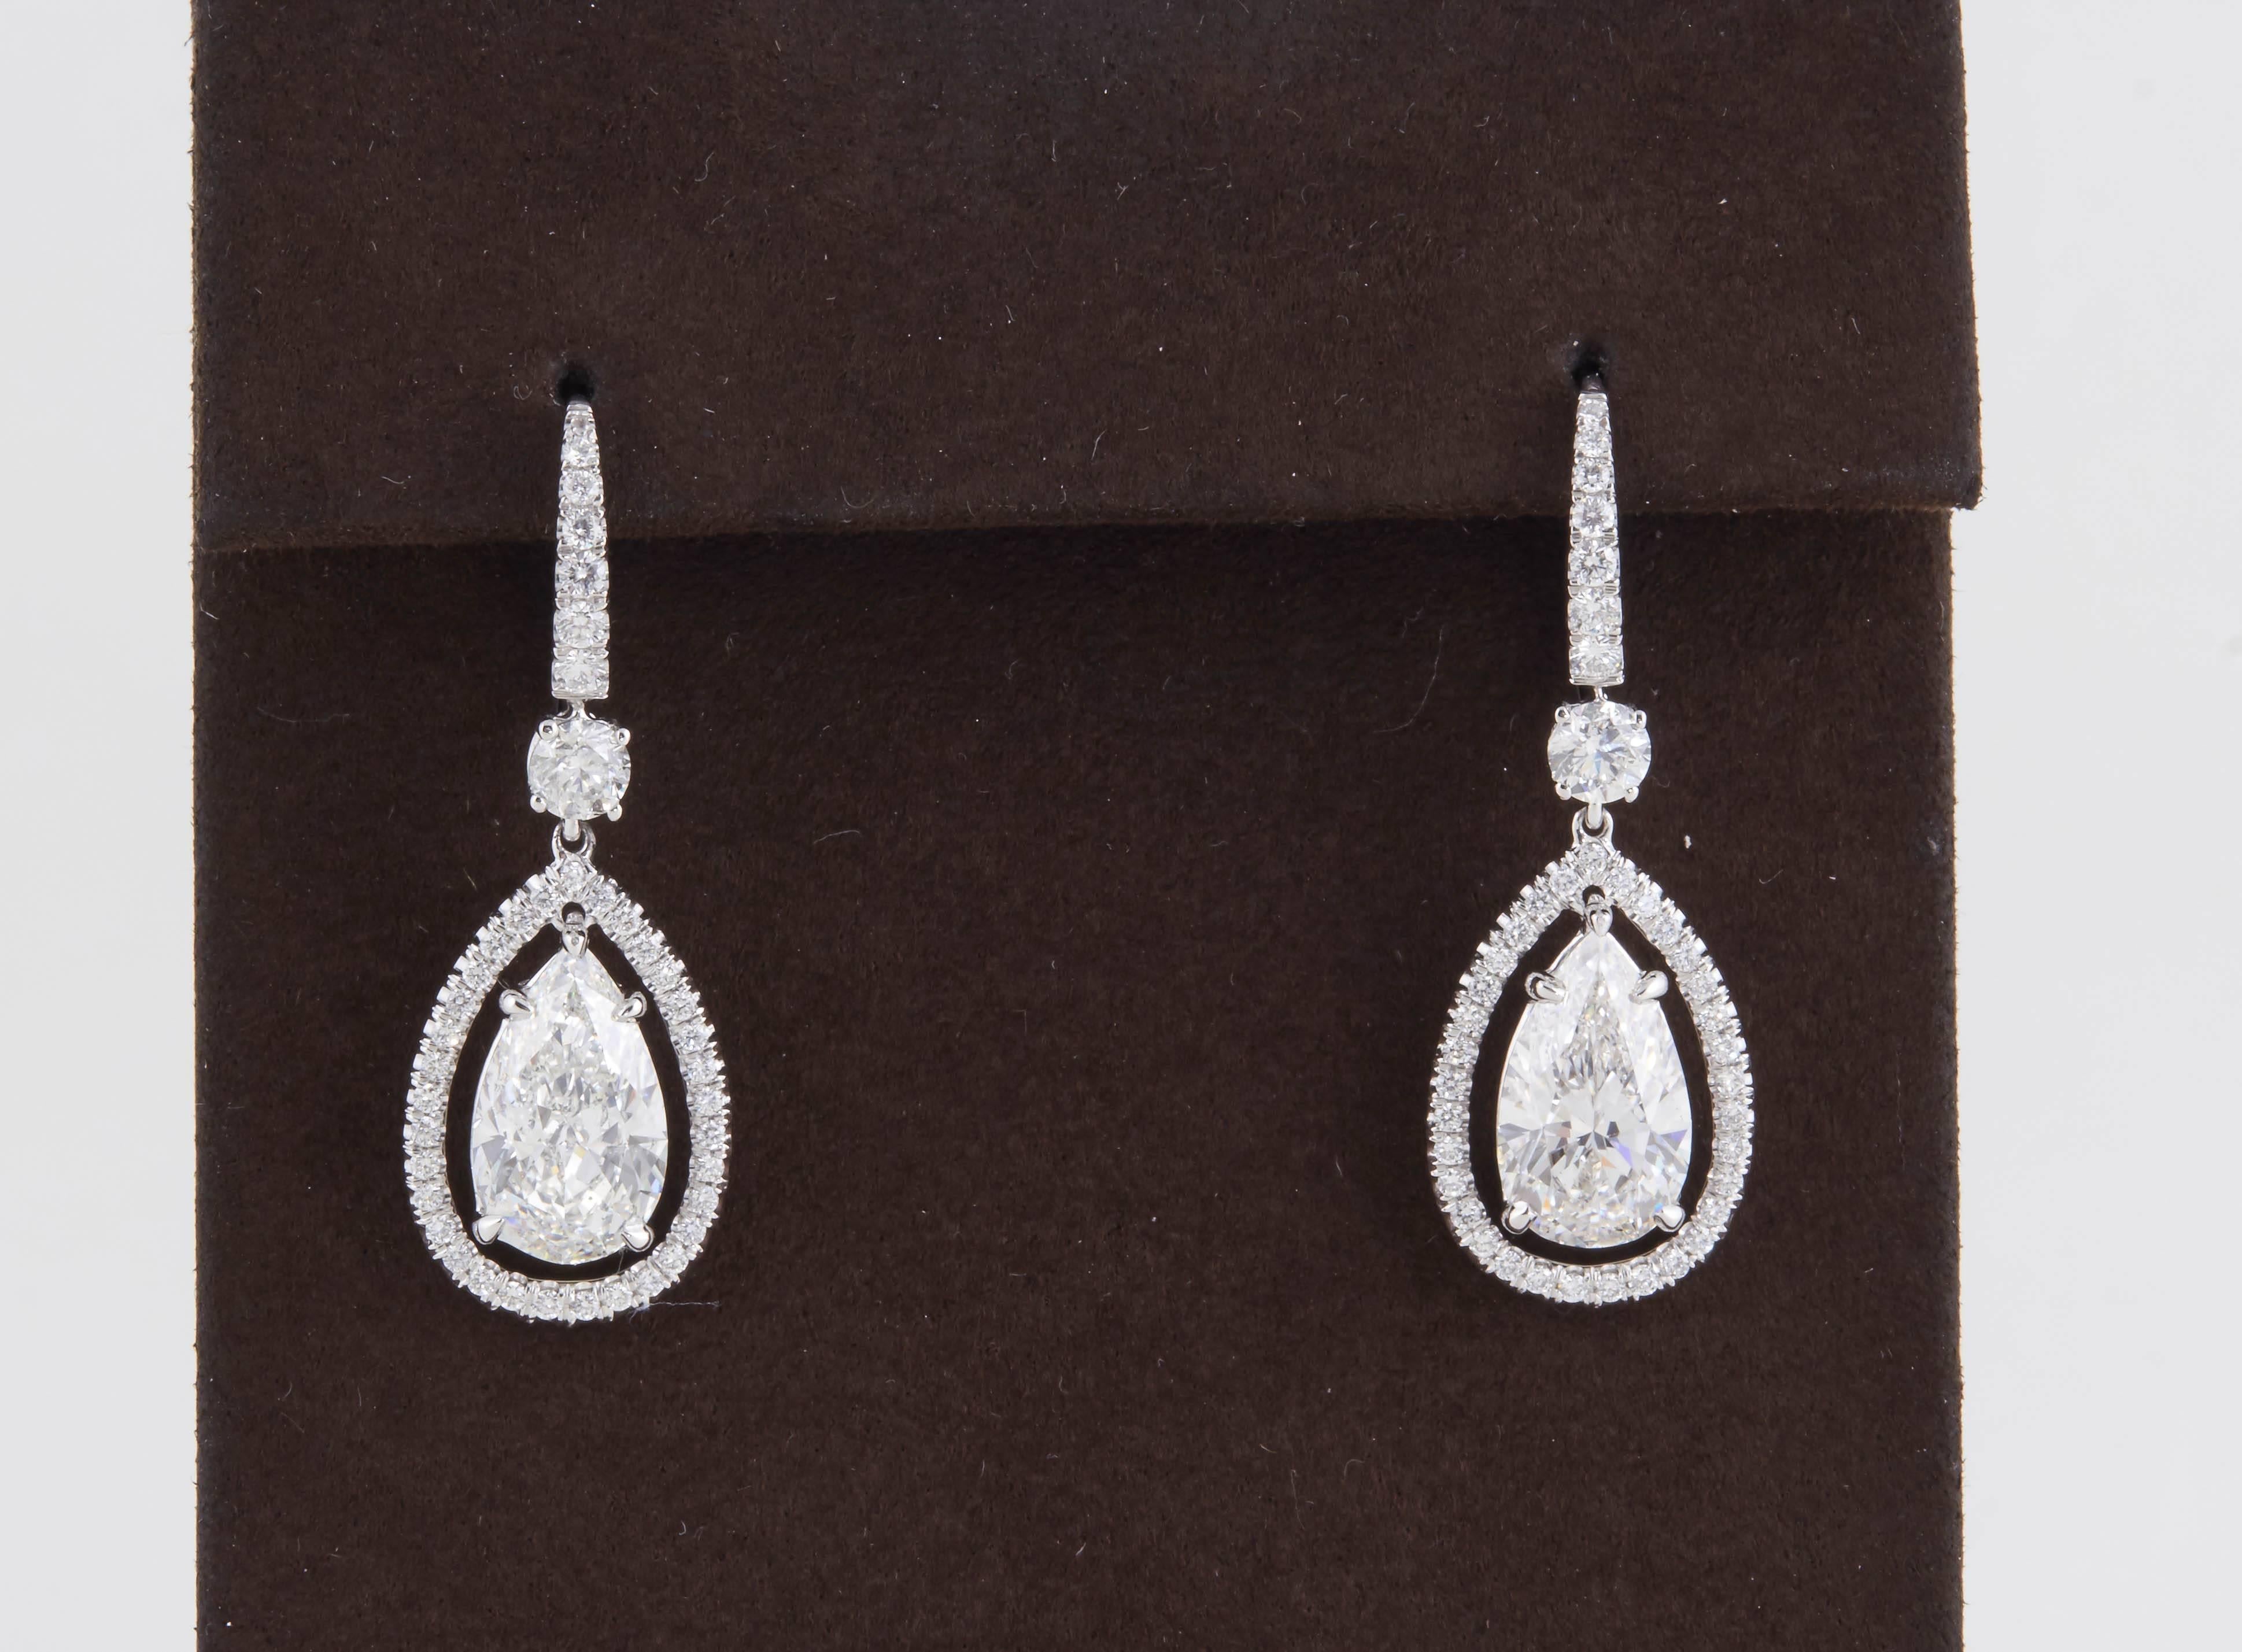 

An exceptional pair of earrings featuring two 3 carat each, high quality GIA certified pear shape diamond drops. 

The drops are set with 1.33 carats of round brilliant cut diamonds all G color VS clarity. 

Two pear shapes weighing a total of